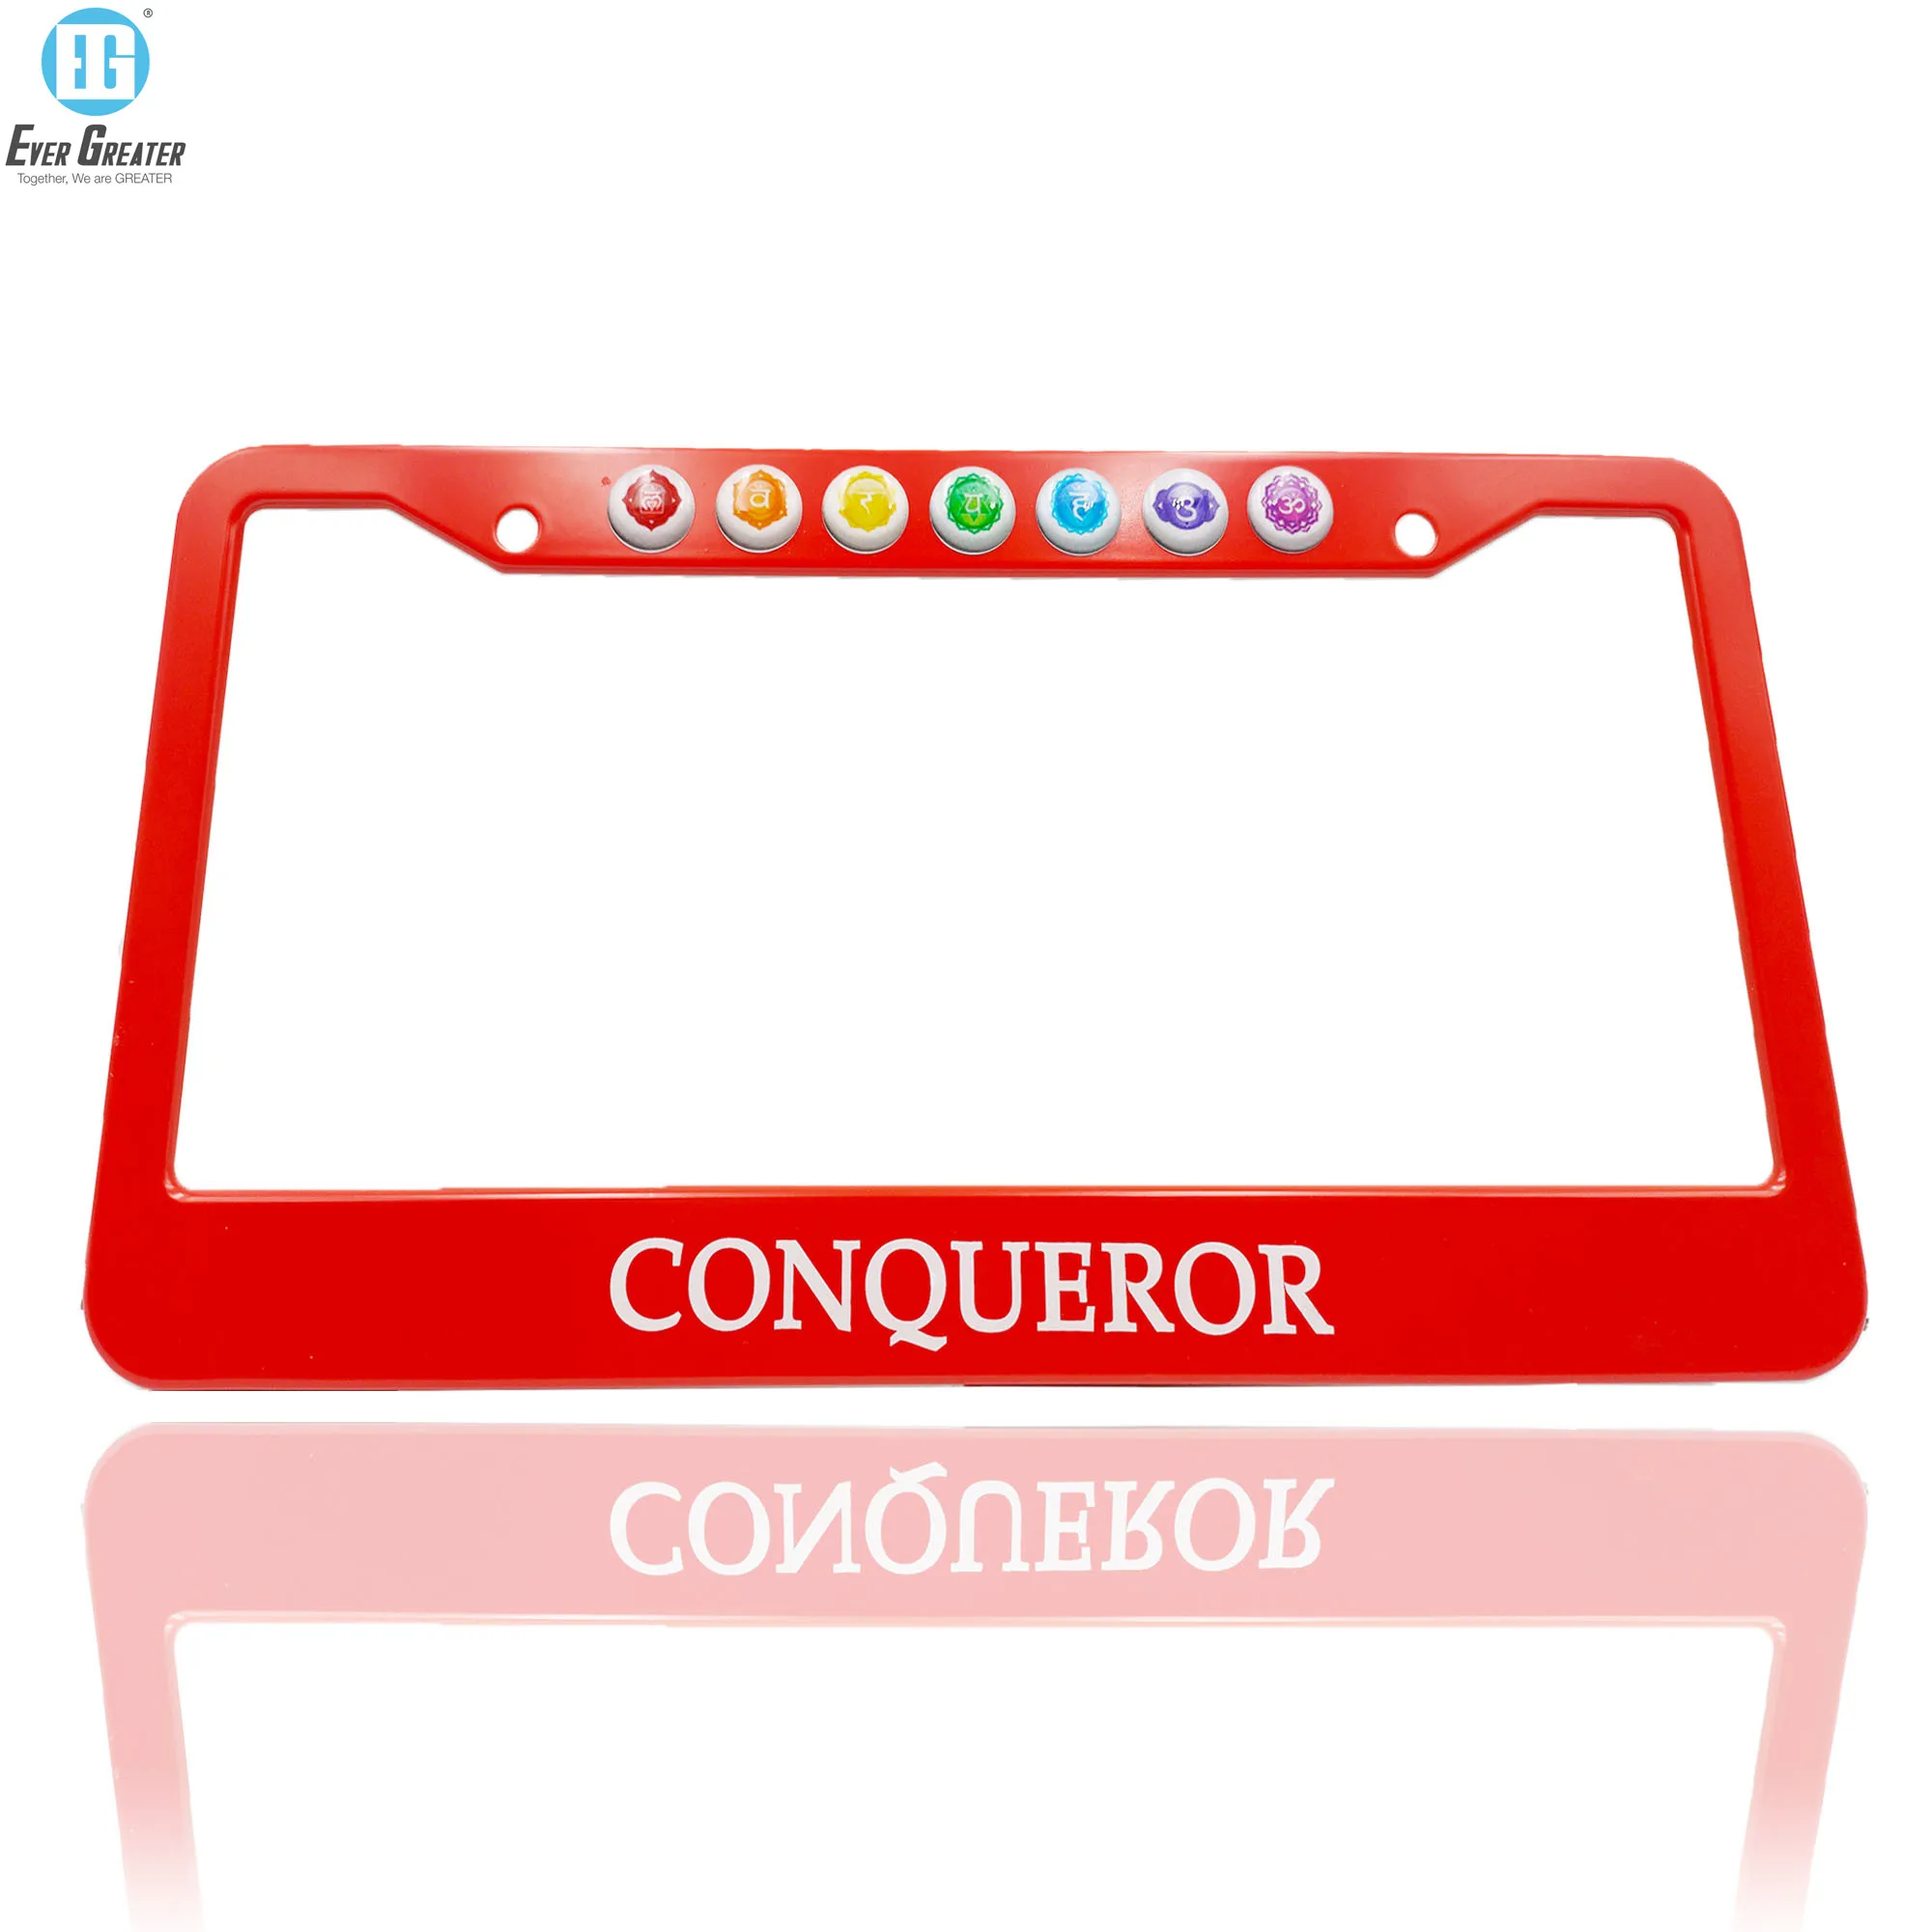 

Custom High Quality Blank Euro Car Number Plate Holder License Plate Frames Truck with 25 Years Experience and ISO Cert